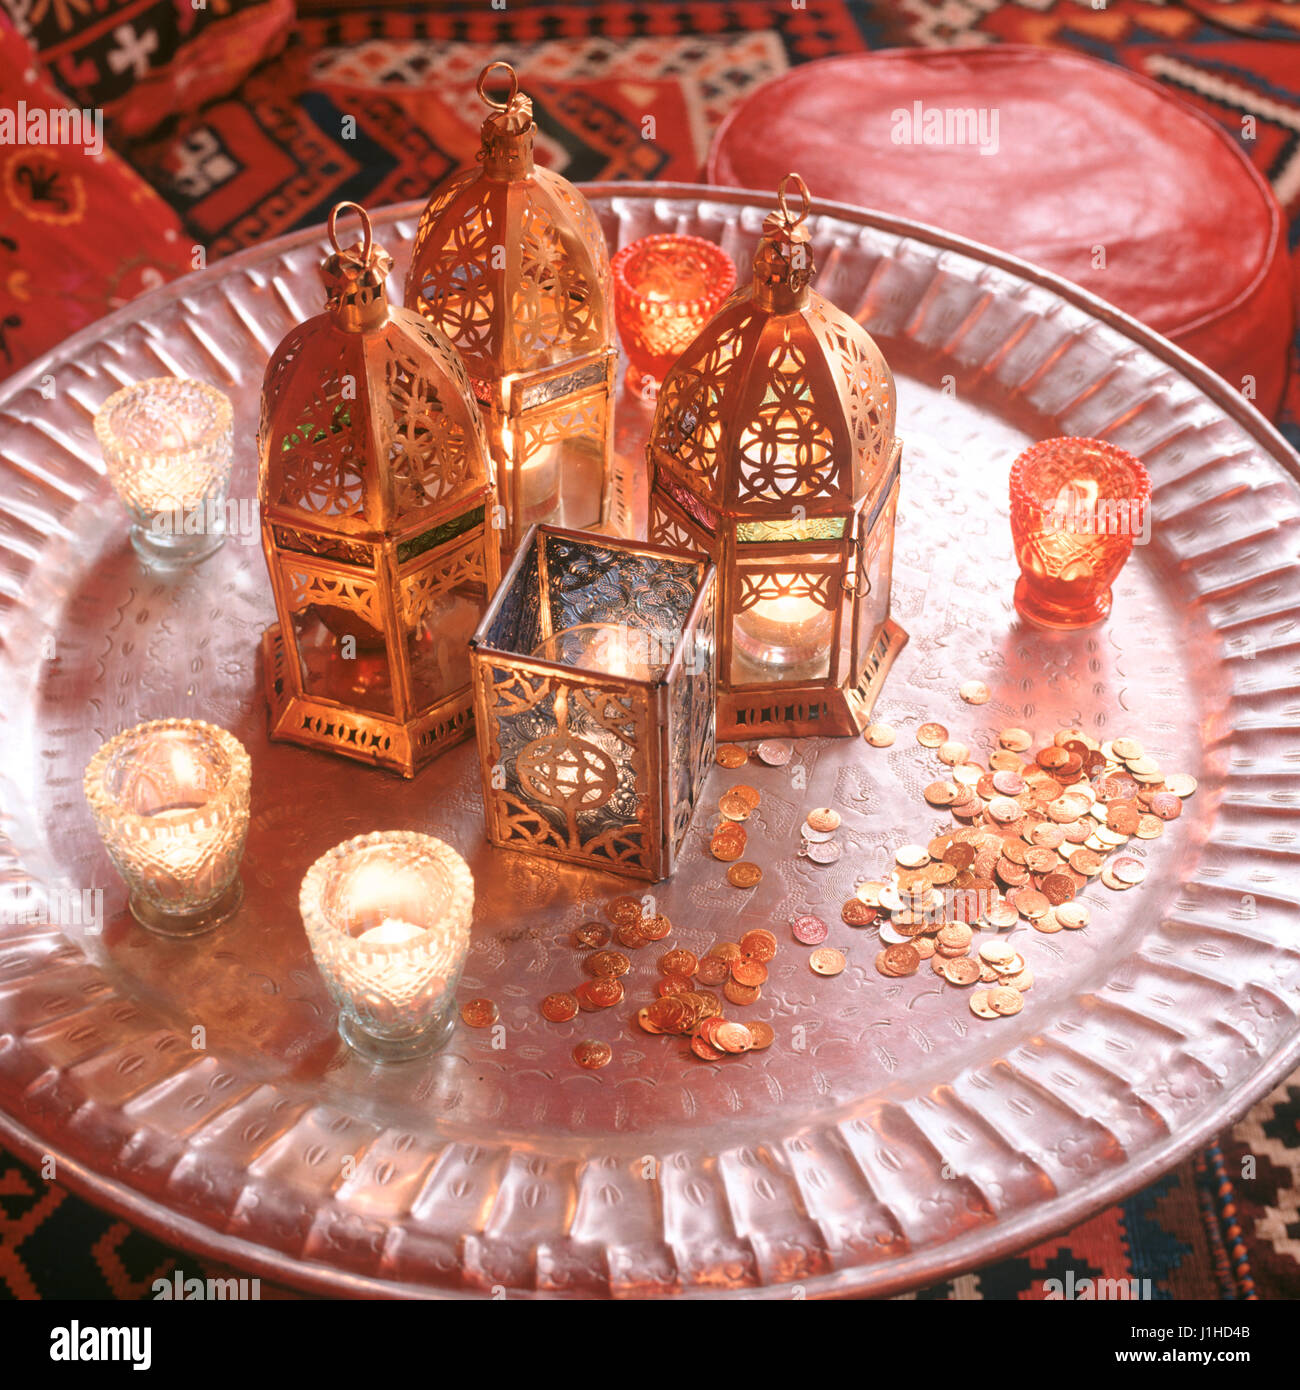 Arabic style lanterns and candles on table Stock Photo - Alamy